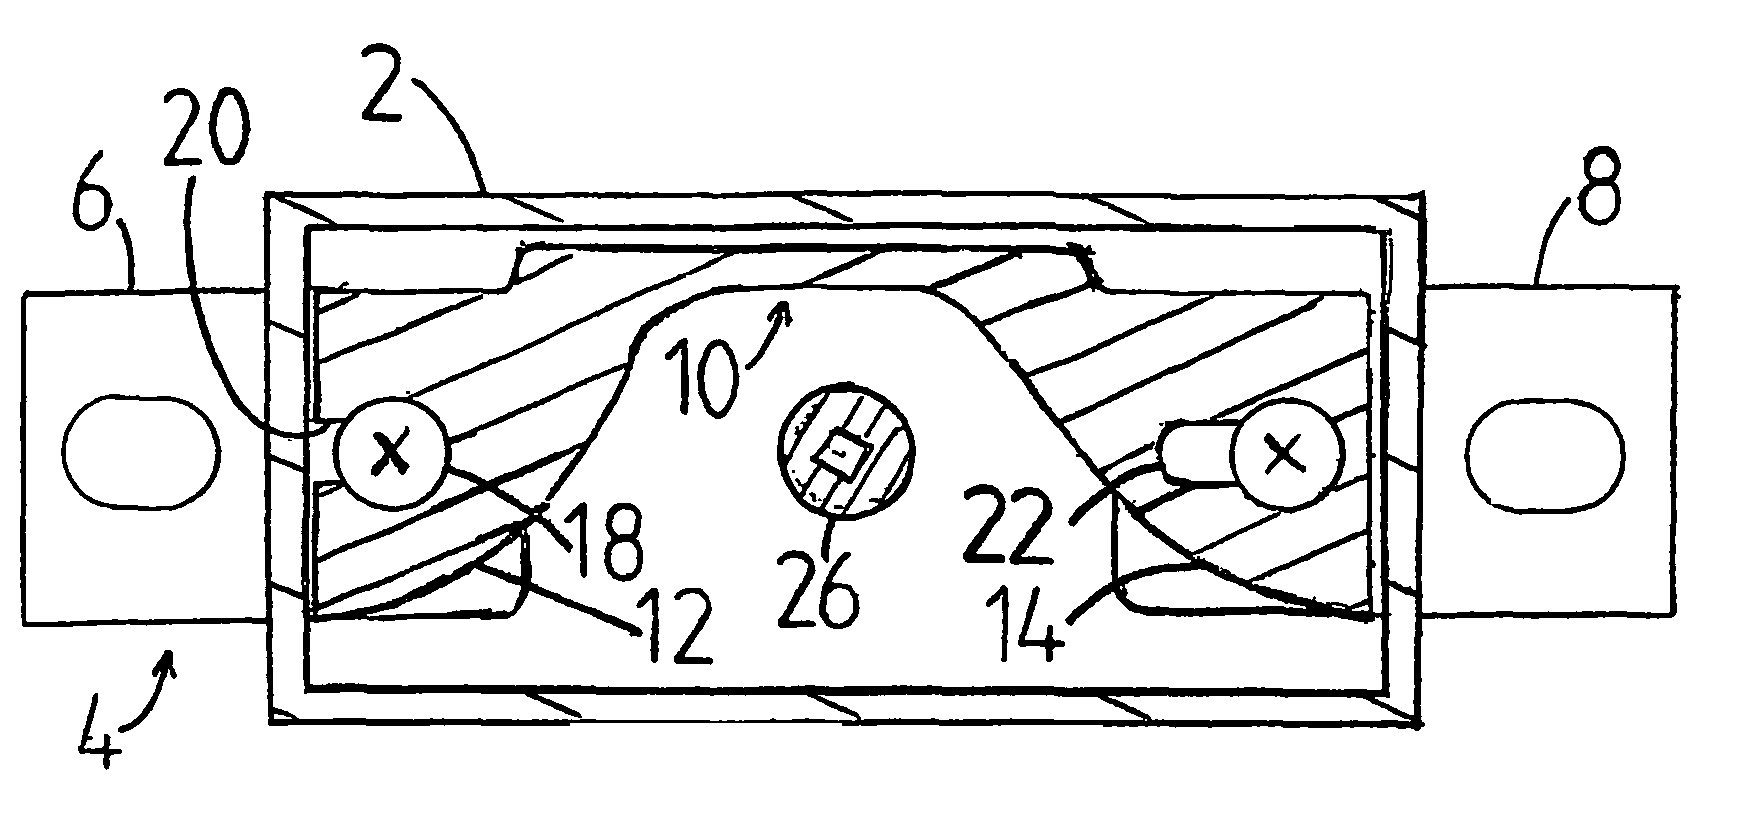 Switching device provided with neutral conductor